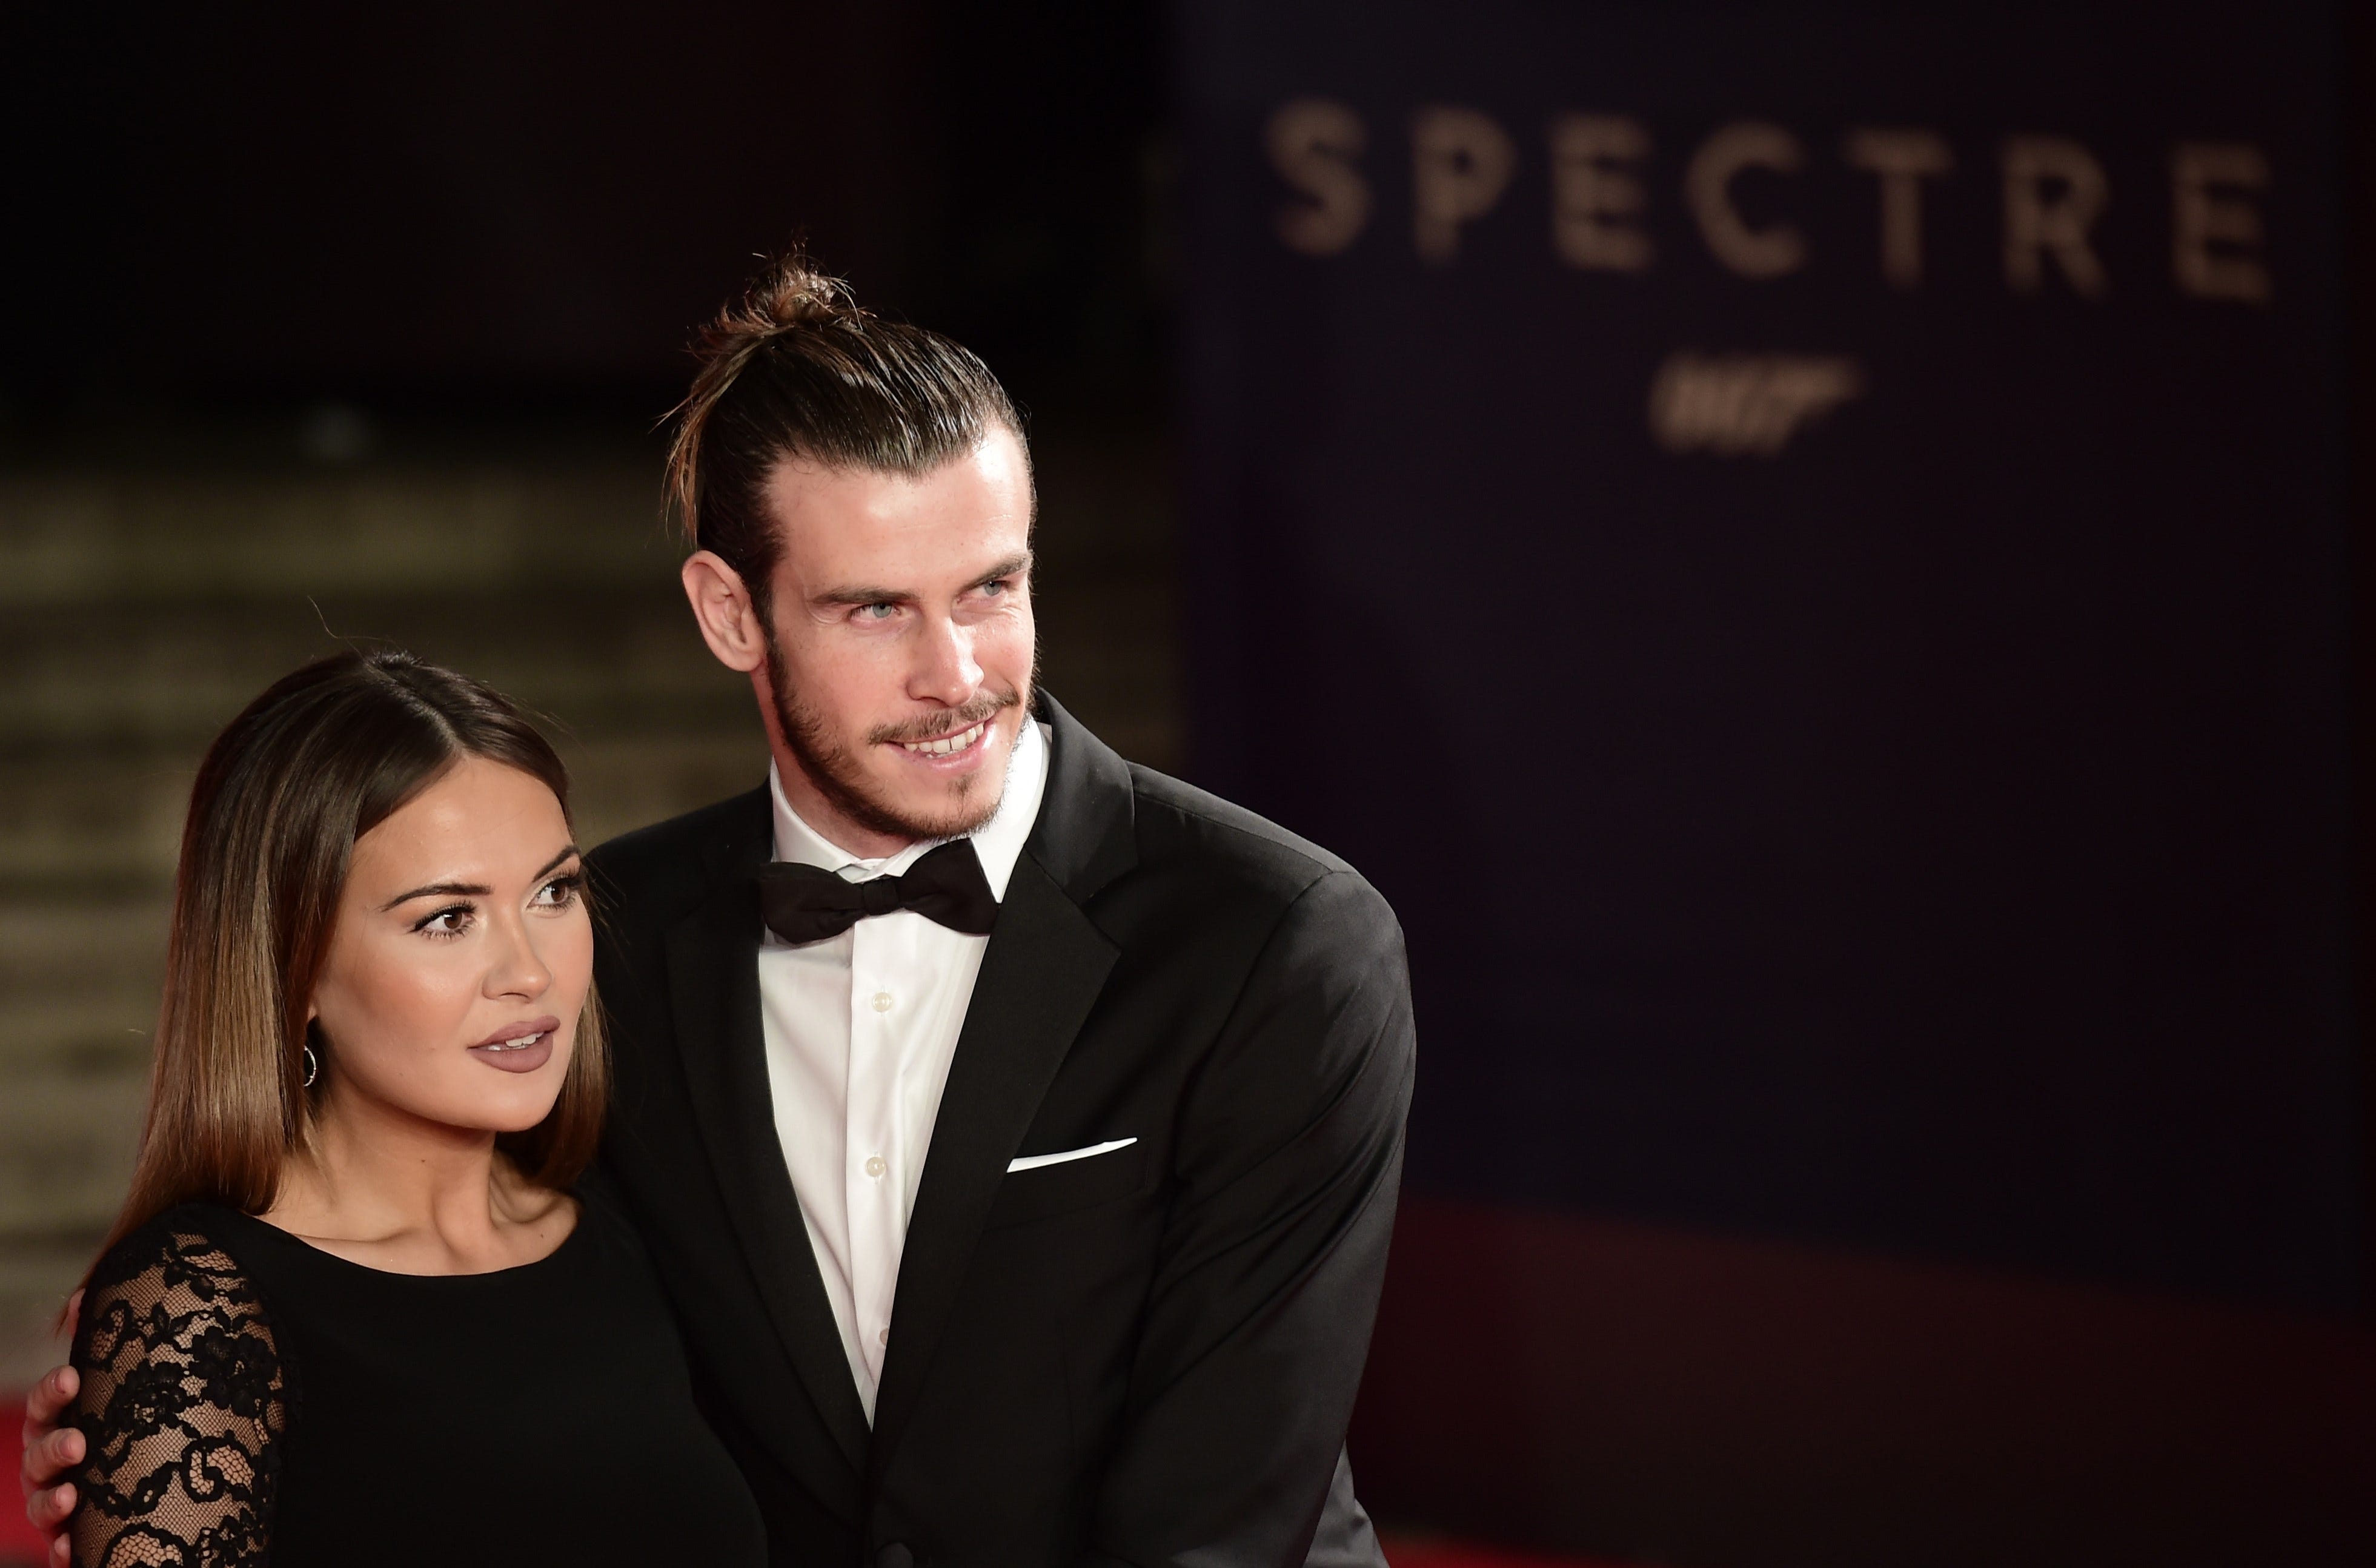 Real Madrid superstar Gareth Bale announces engagement to